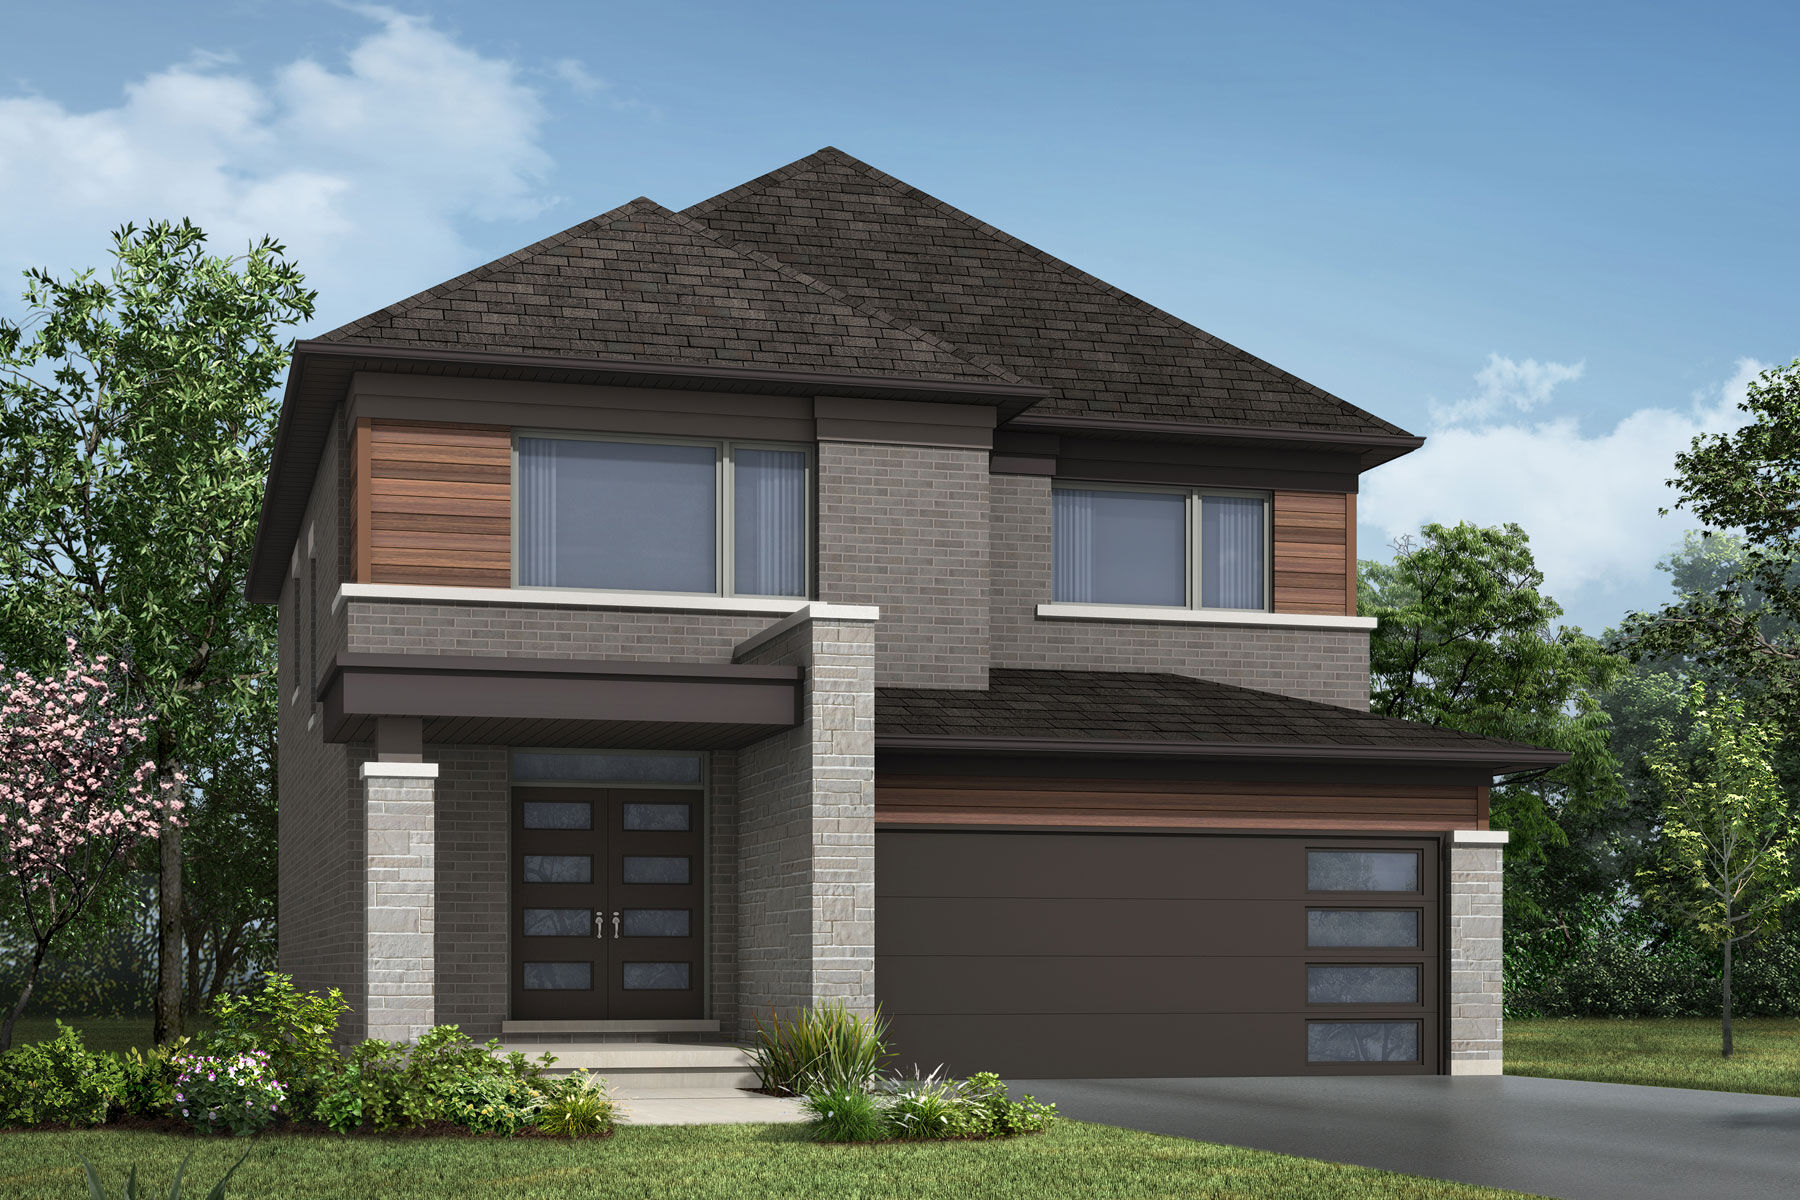  Elevation Front with garage, window, exterior stone and exterior brick